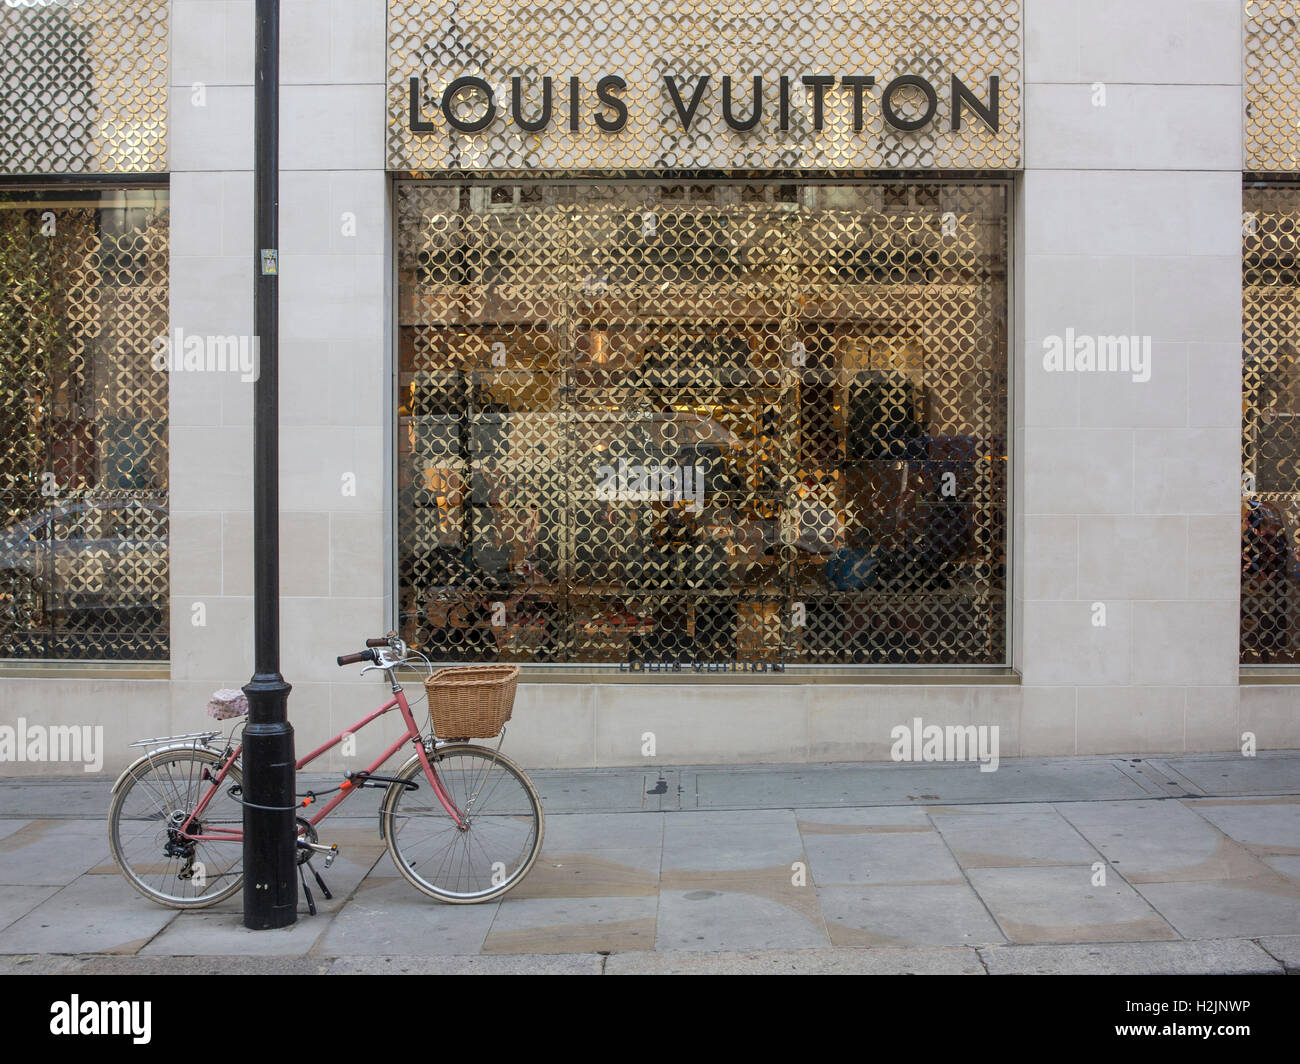 A pink bicycle parked outside a Louis Vuitton shop in London Stock Photo